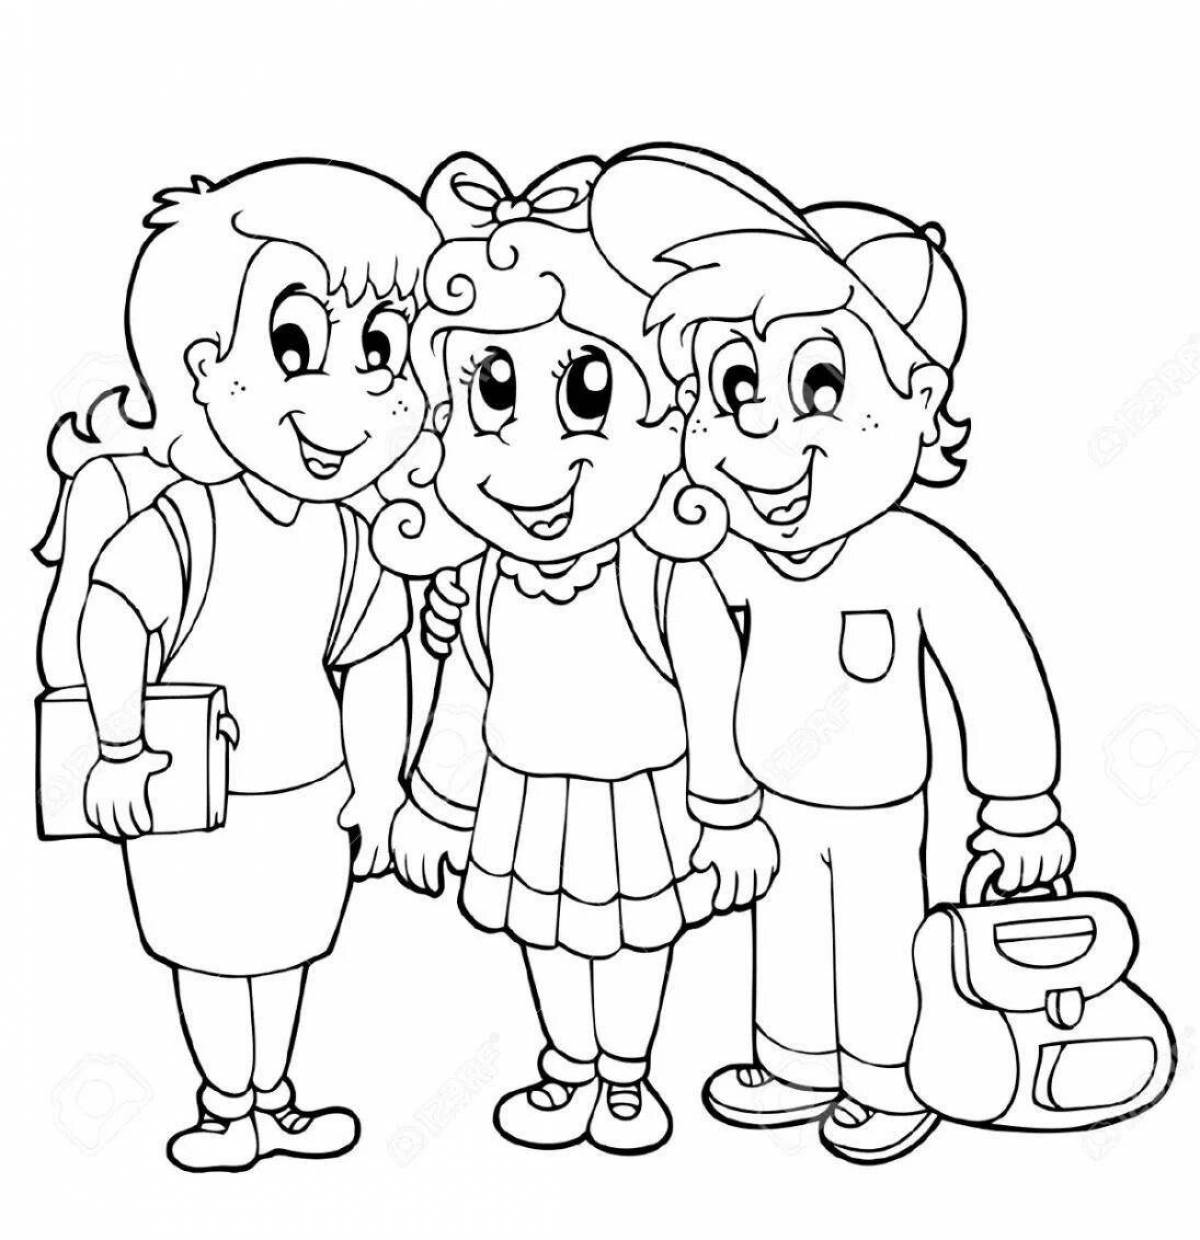 Colorful friendship coloring page